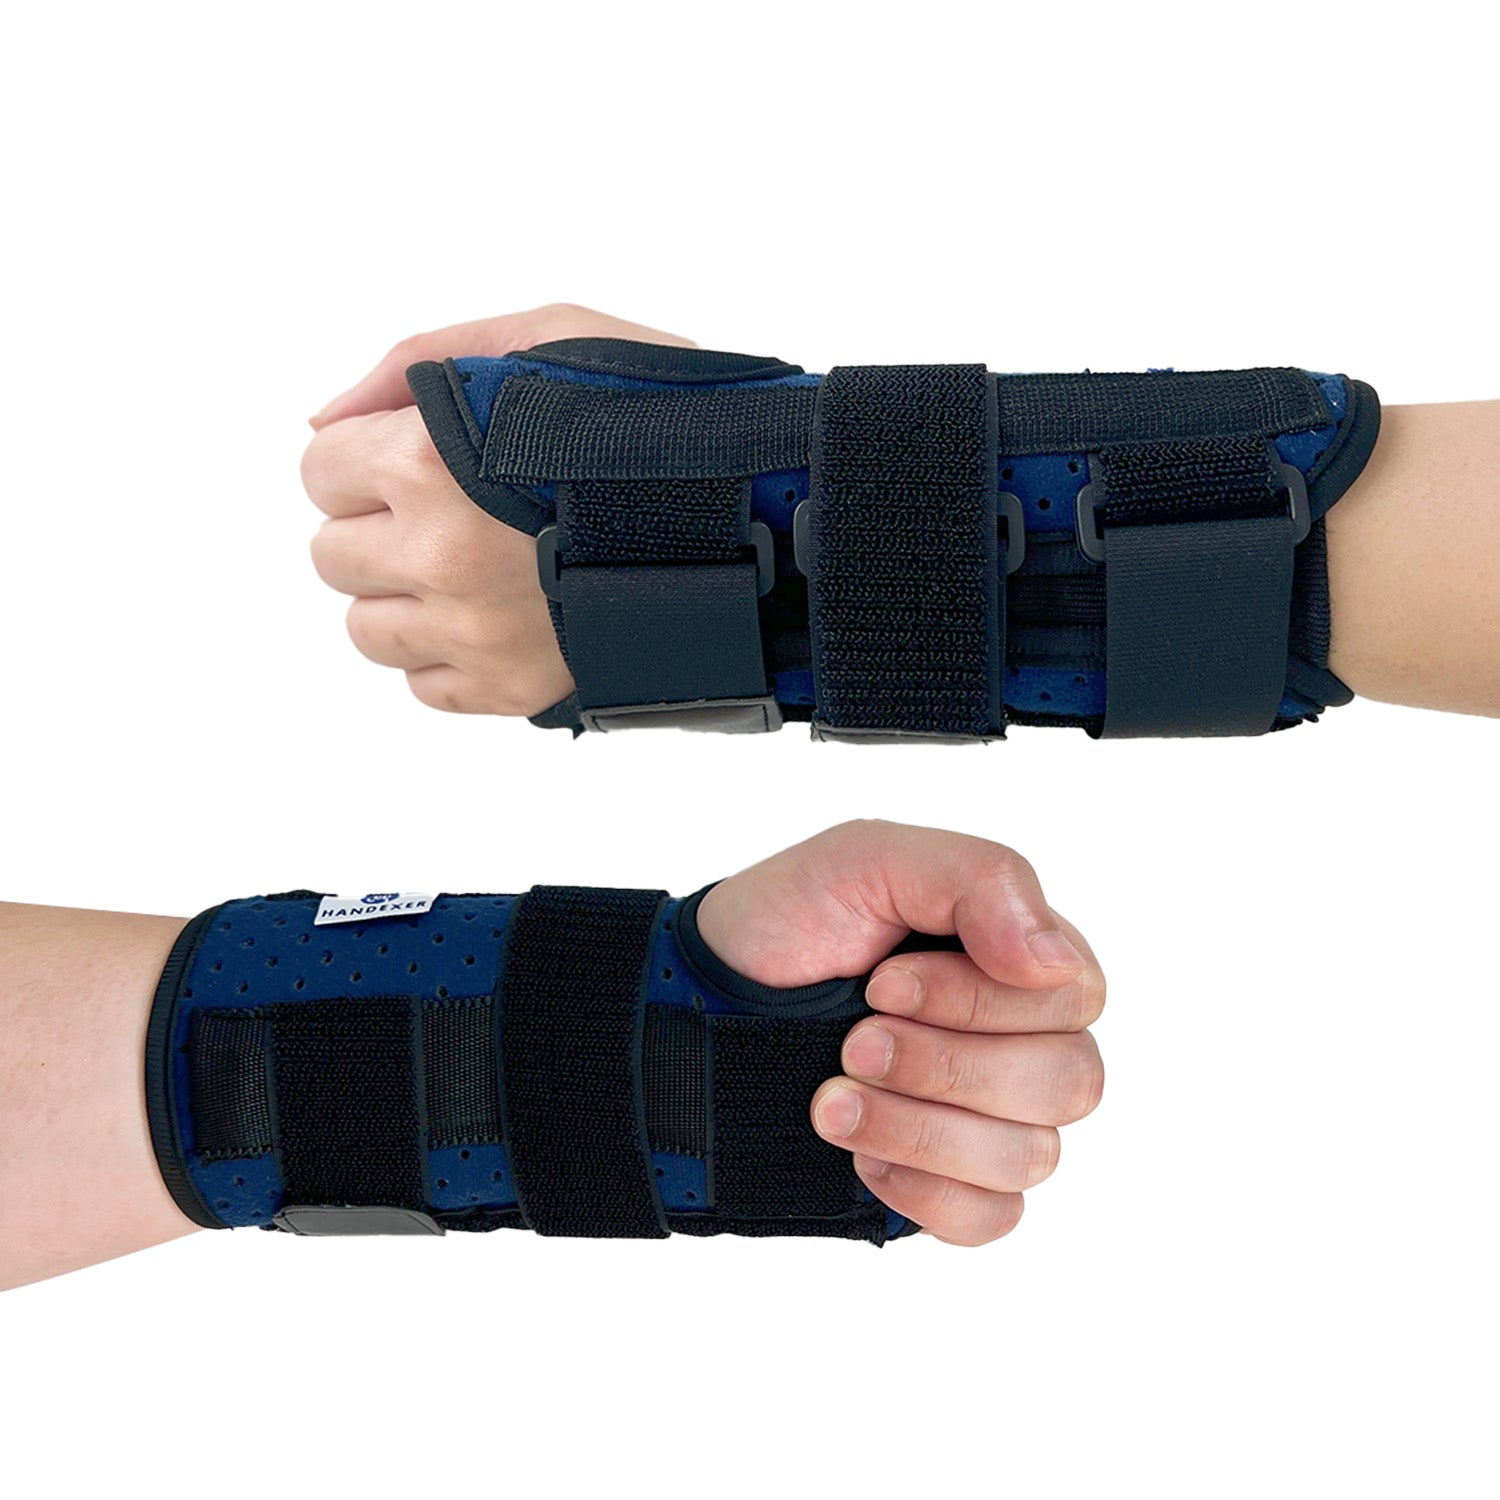 FEATOL Wrist Brace for Carpal Tunnel, Adjustable Night Wrist Support Brace  with Splints Right Hand, Small/Medium, Hand Support for Arthritis